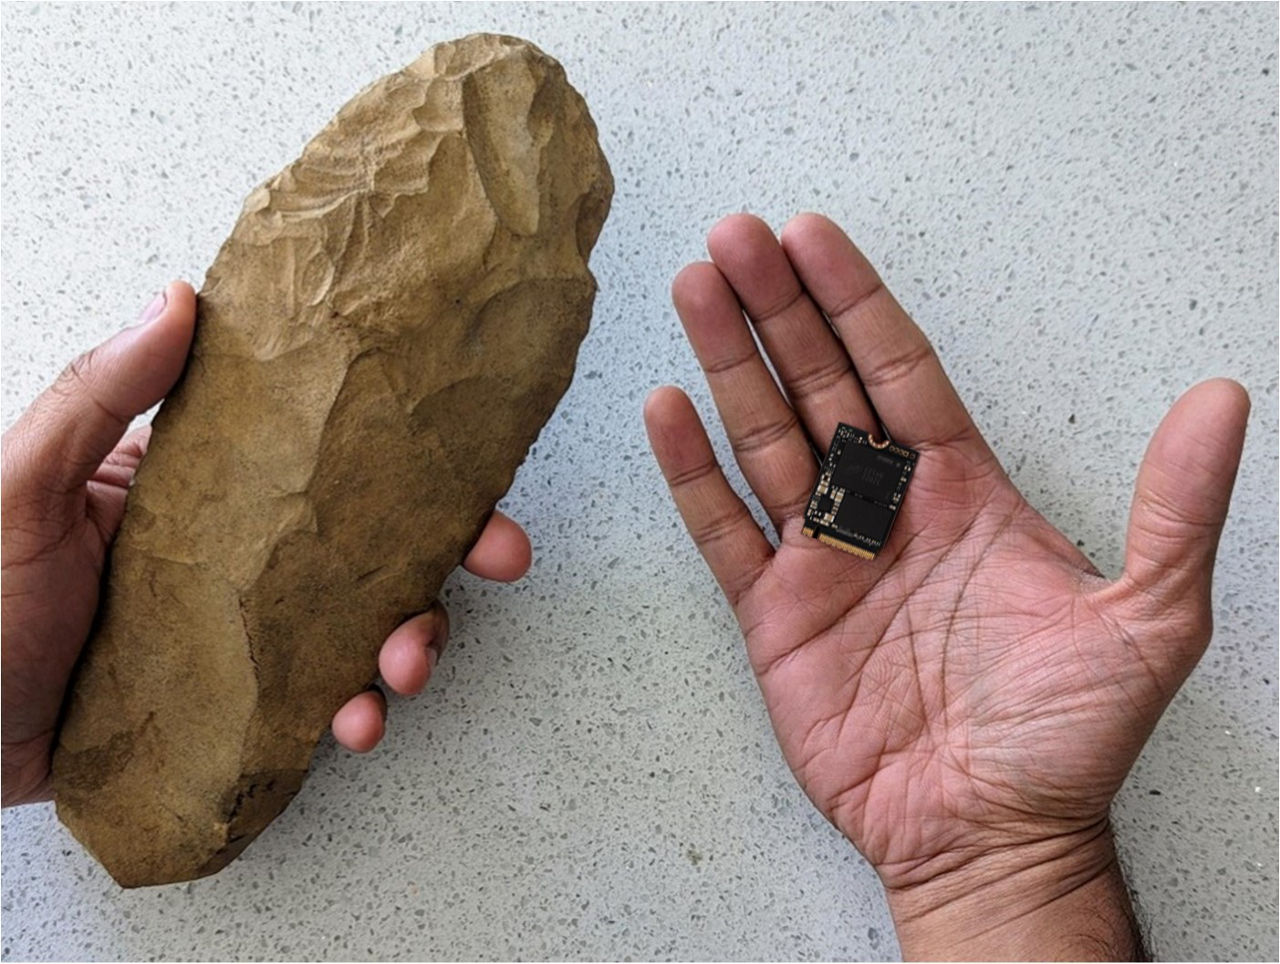 Neolithic stone tool and Micron 2500 SSD